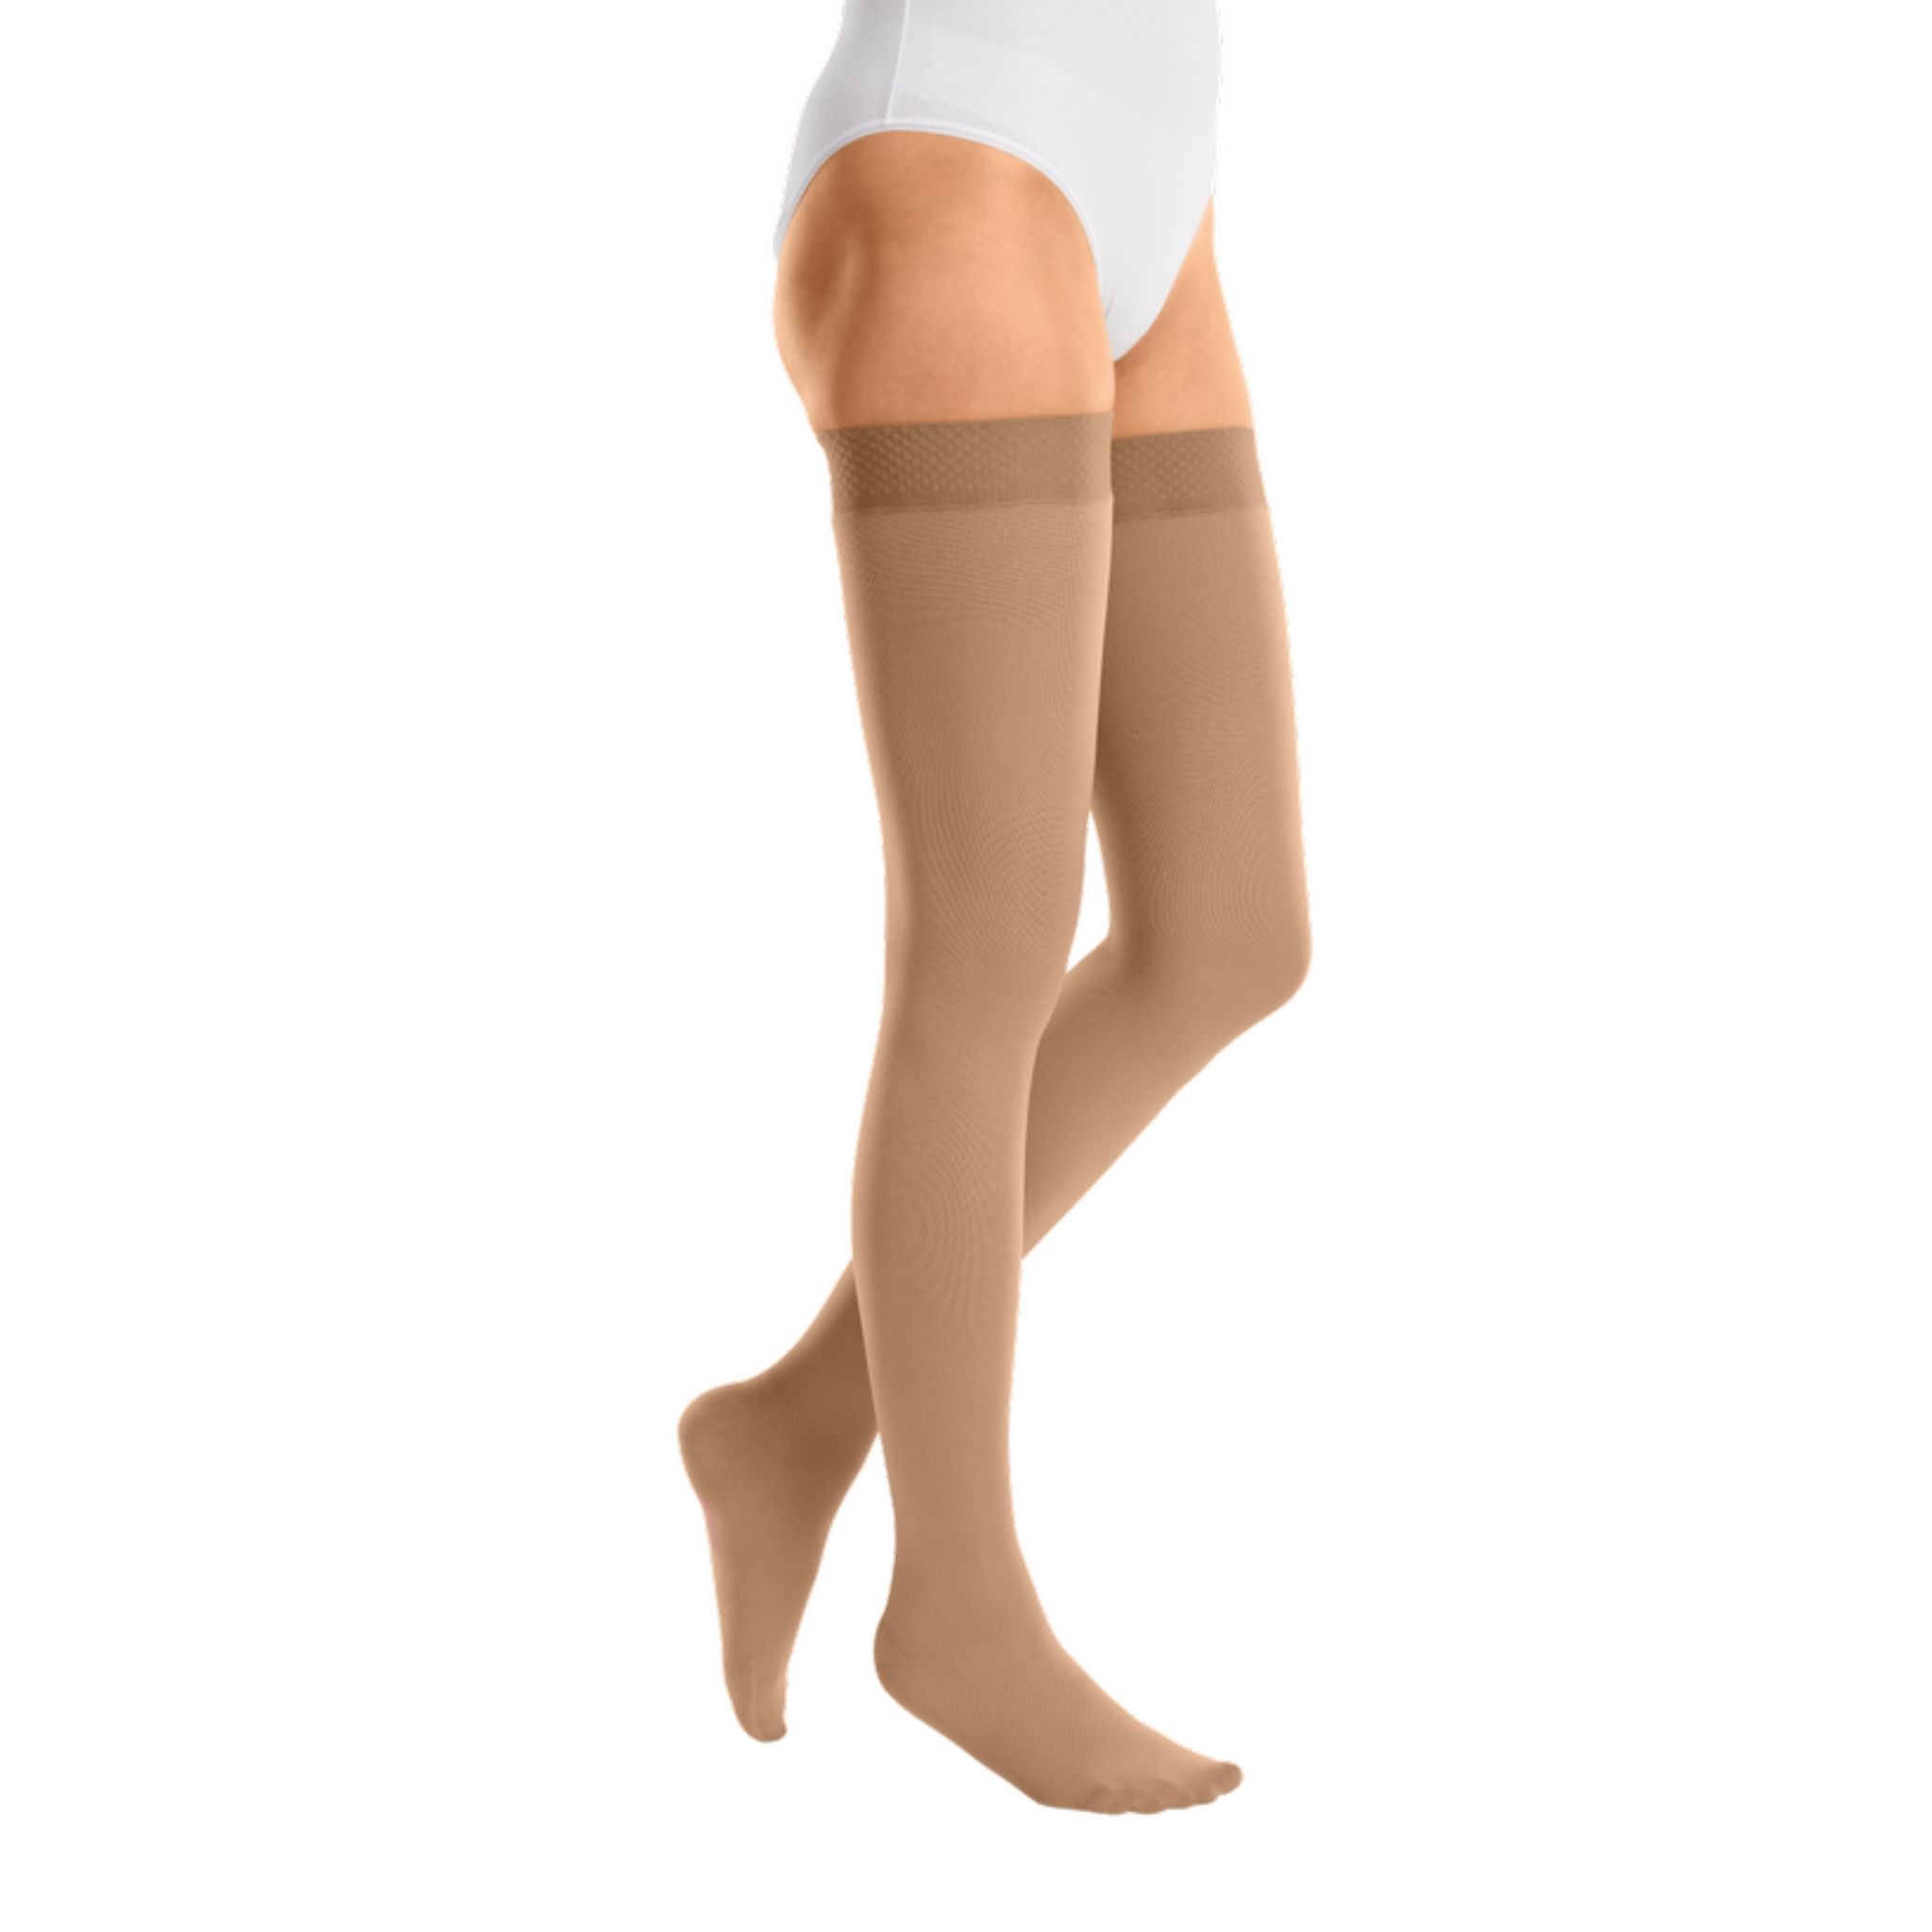 Compression Stockings  Thigh High  Open Toe  Caramel  mediven cotton